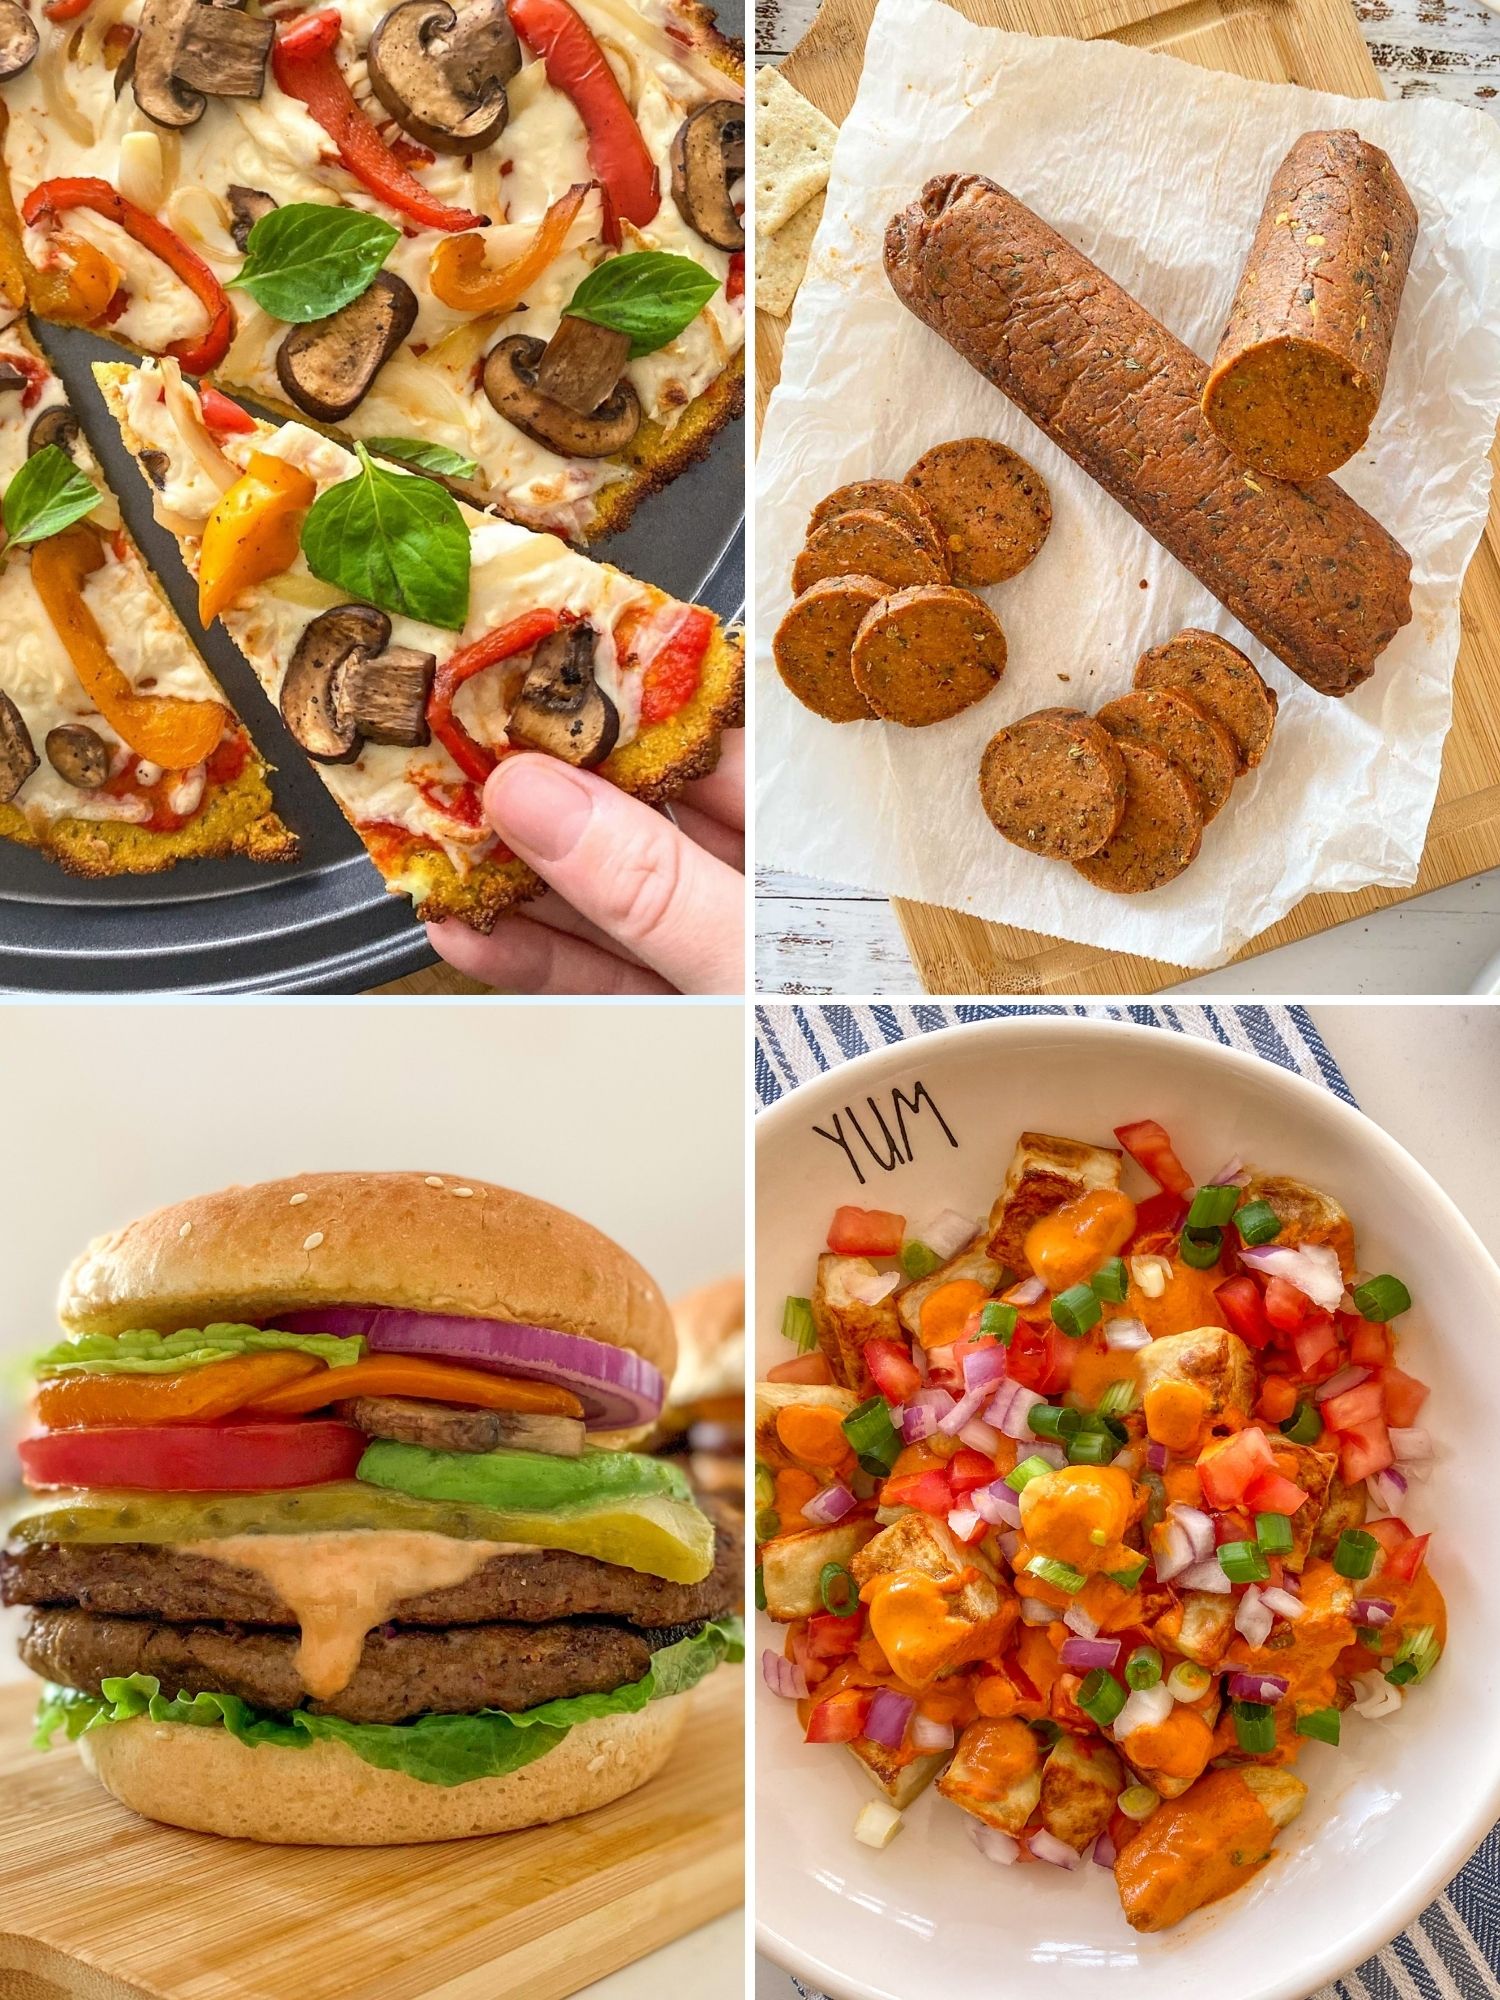 Image collage of pizza, salami, burger and poutine.